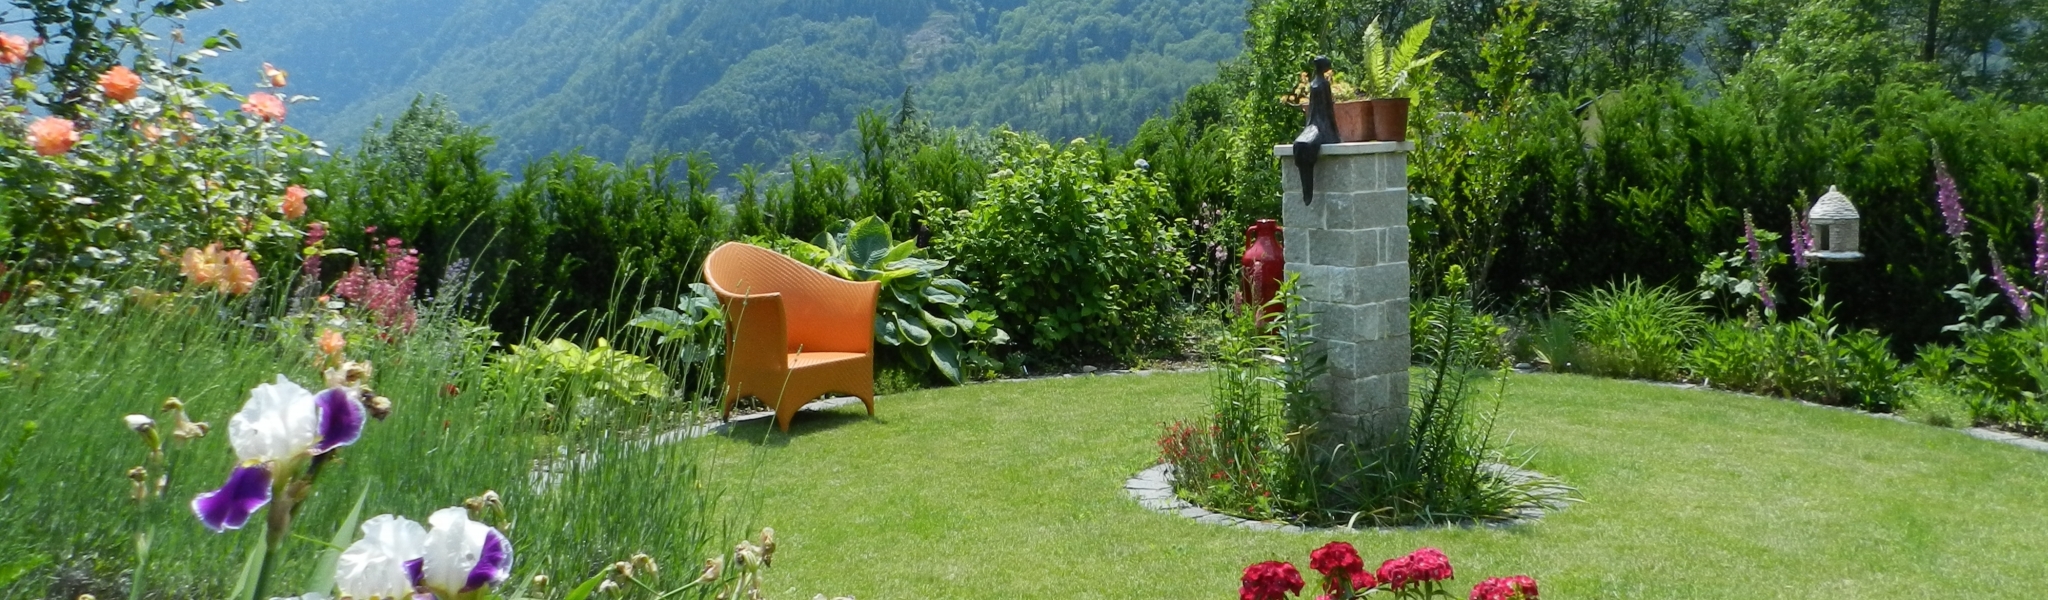 Casa alla Cascata - House by the Waterfall - Self-catering holiday apartment Maggia Valley Vallemaggia